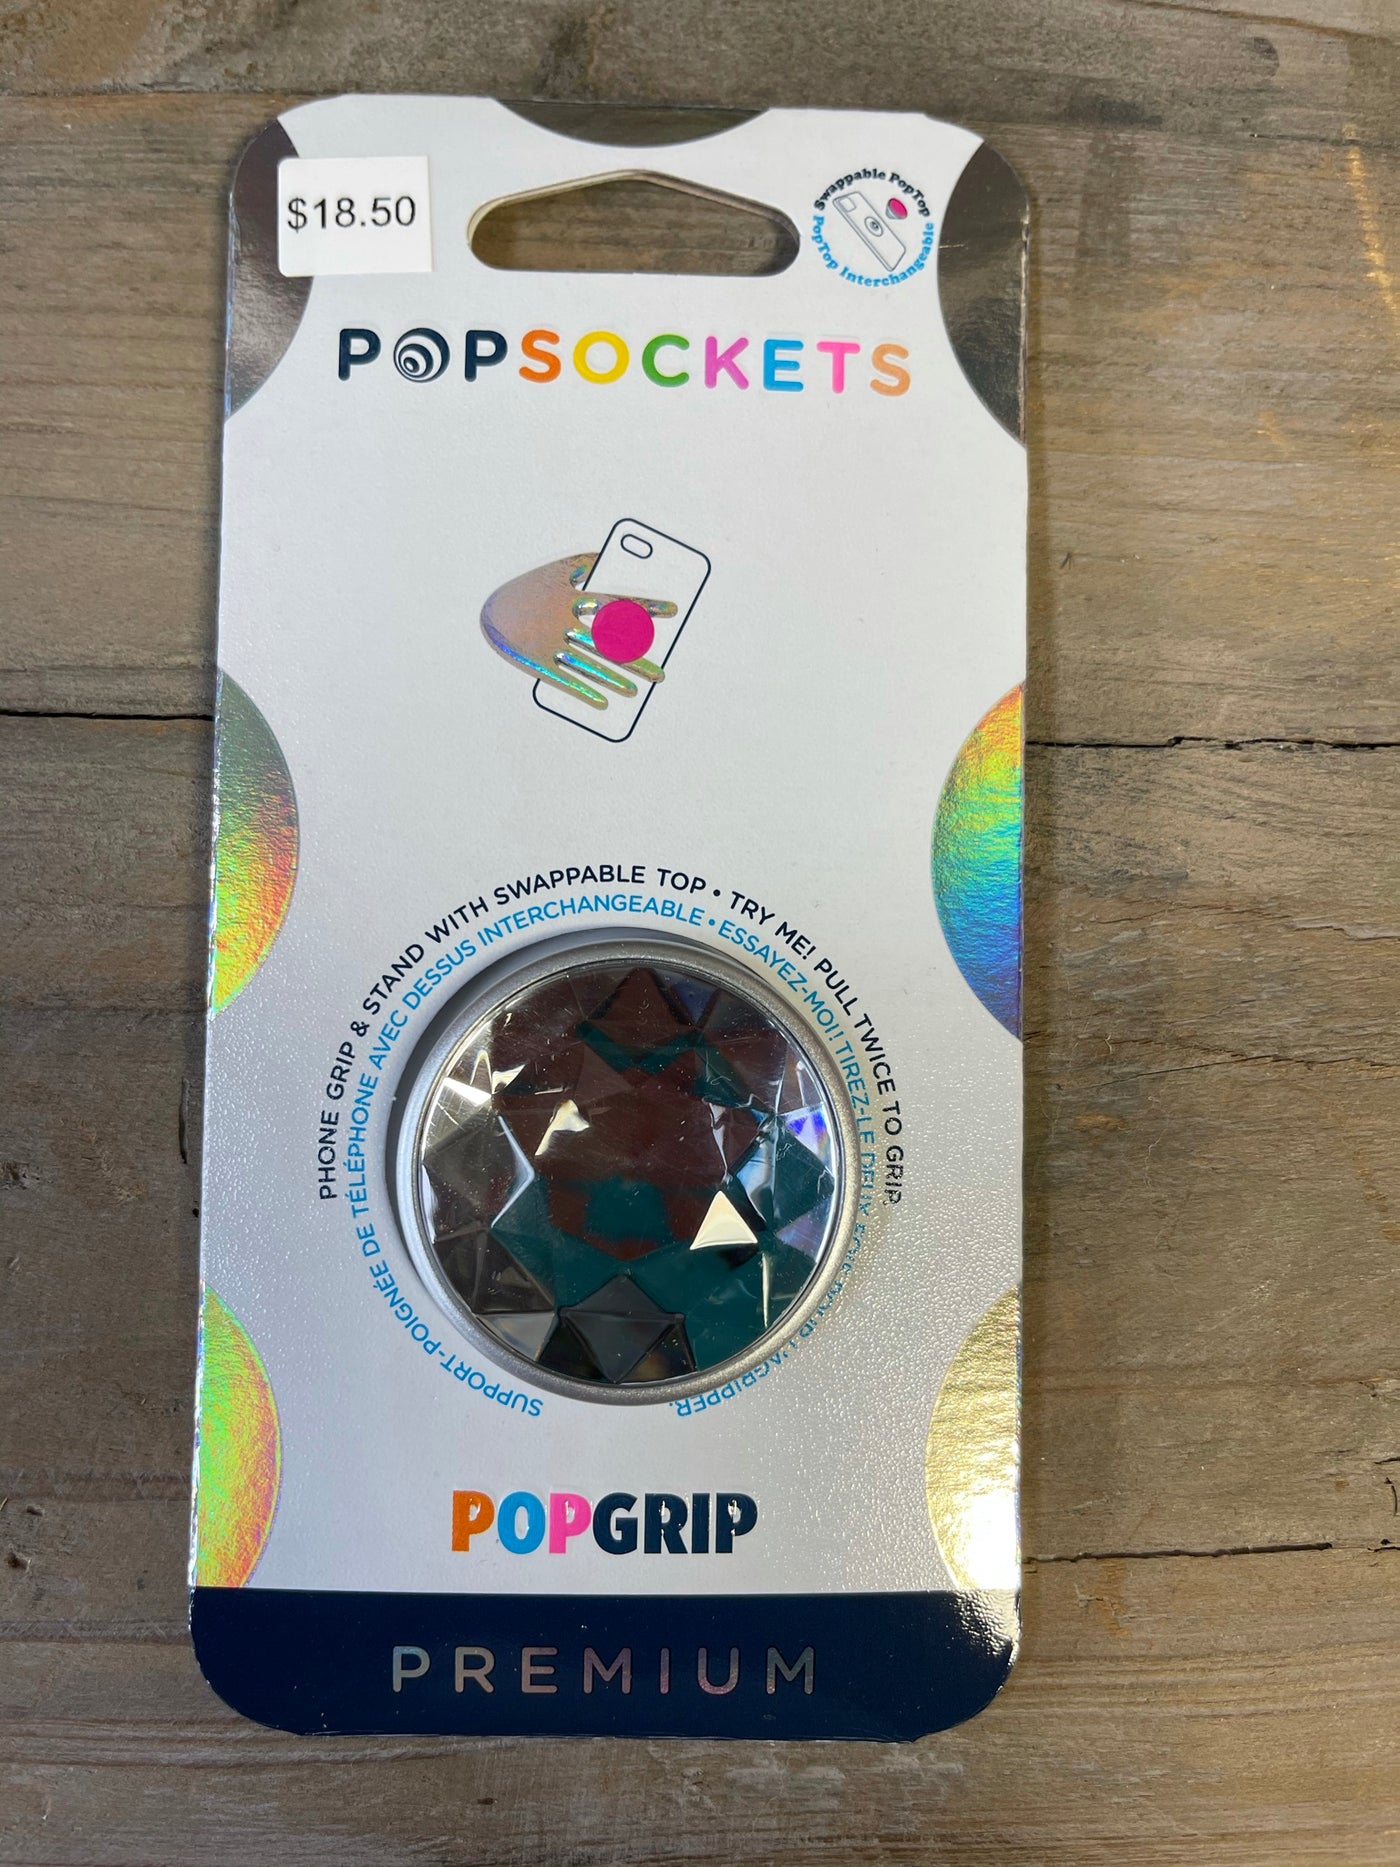 PopSockets-100 Accessories/MISC-PopSockets-Market Street Nest, Fashionable Clothing, Shoes and Home Décor Located in Mabank, TX